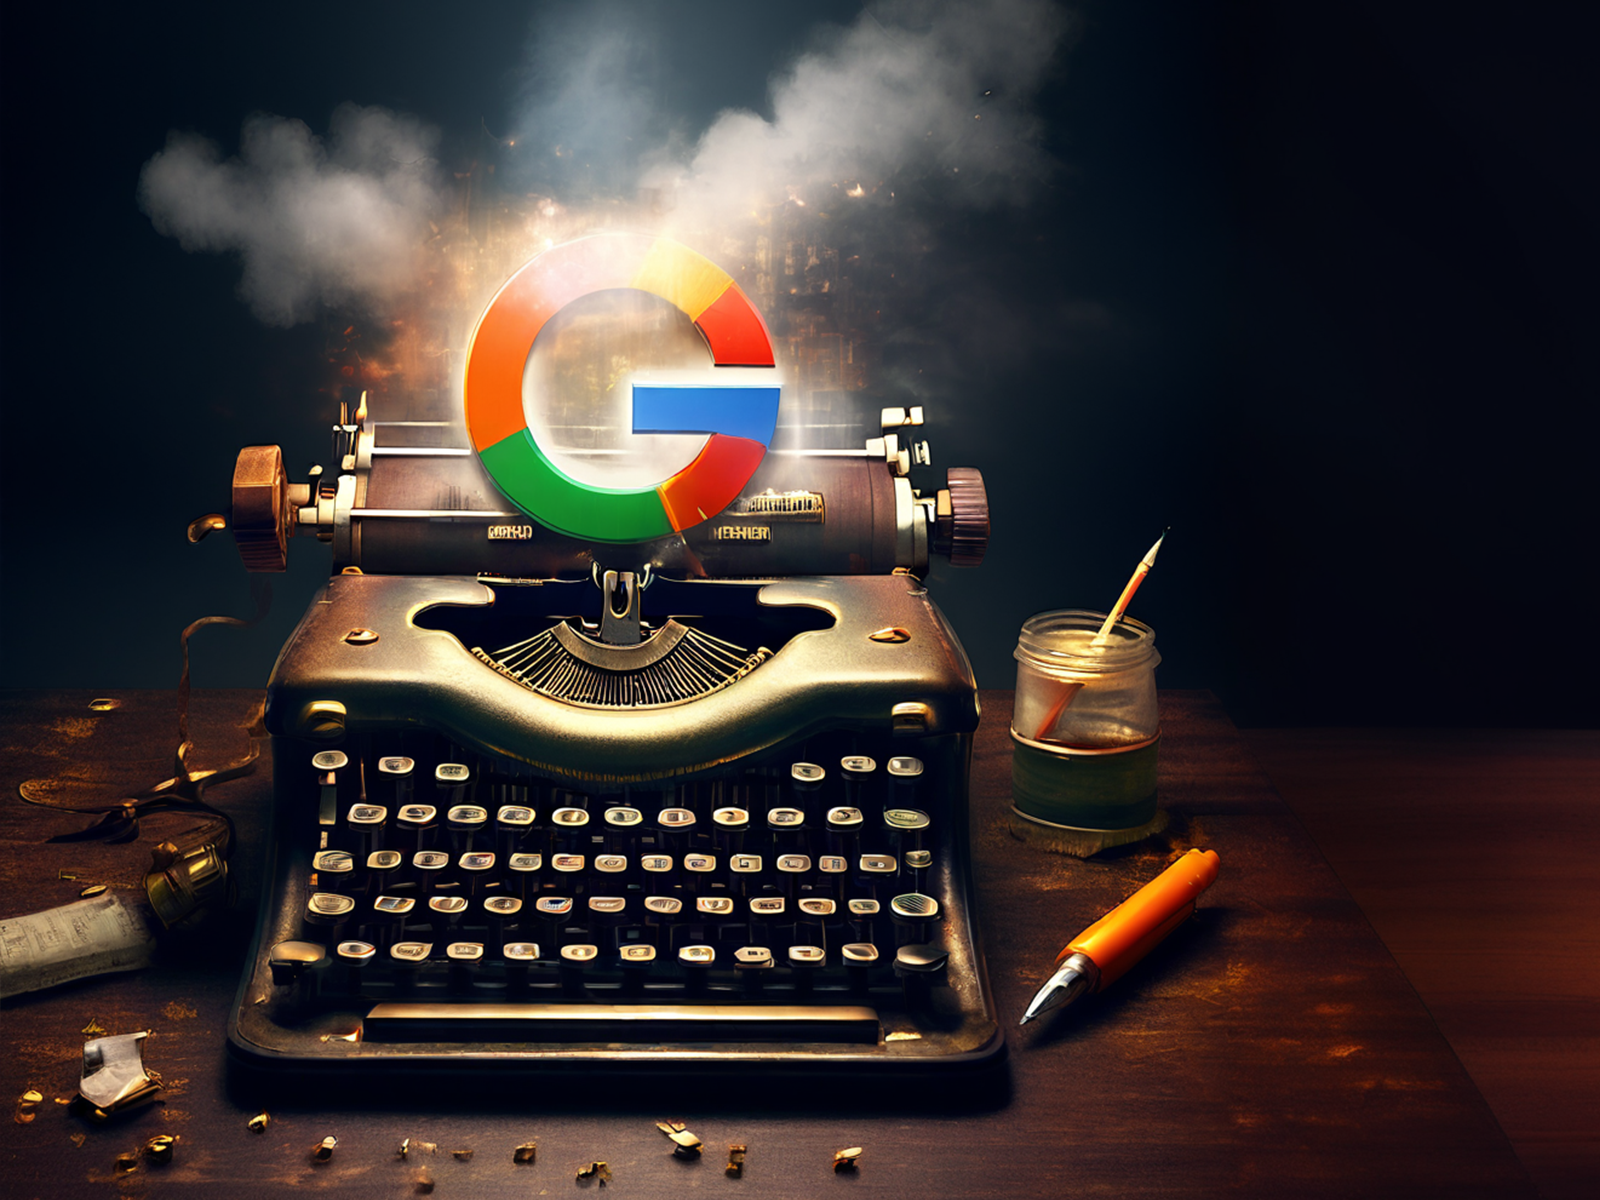 Google Launches “Help Me Write” AI Assistant for Chrome Browser